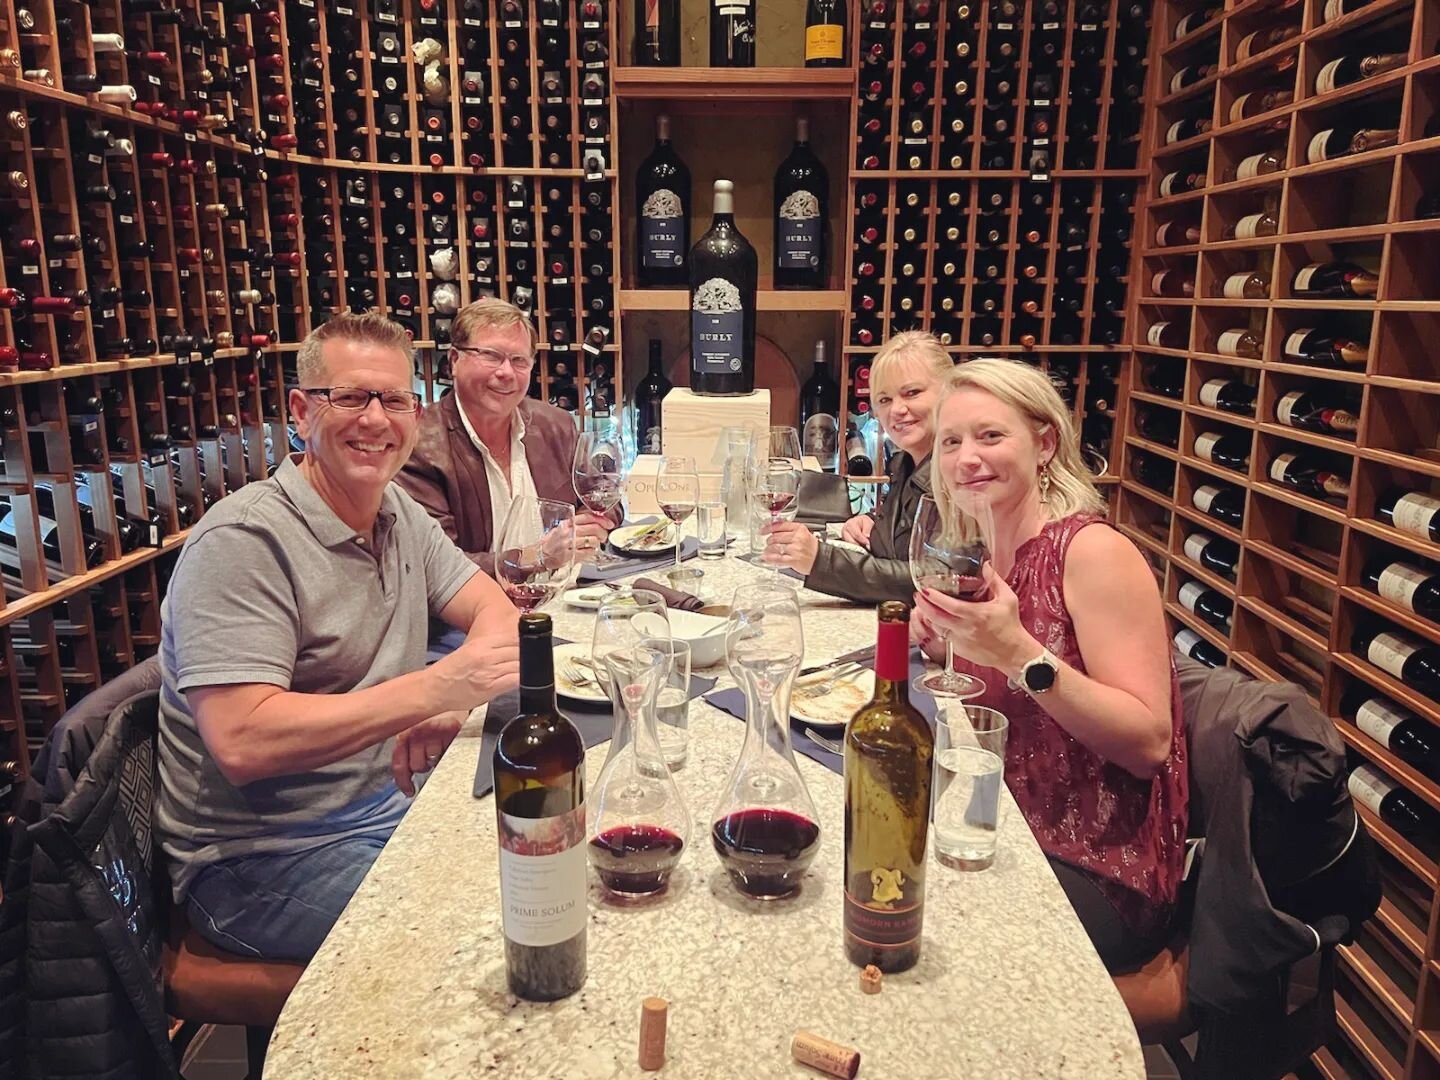 We love receiving pictures like this one from our friends John &amp; Natalie Merrill. And WOW check out that cellar. Can't wait to see you guys in the Spring❤️
Cheers!!! 

#wineclub #winecellar #cheers #friends #family #napawine #holidays #winetastin